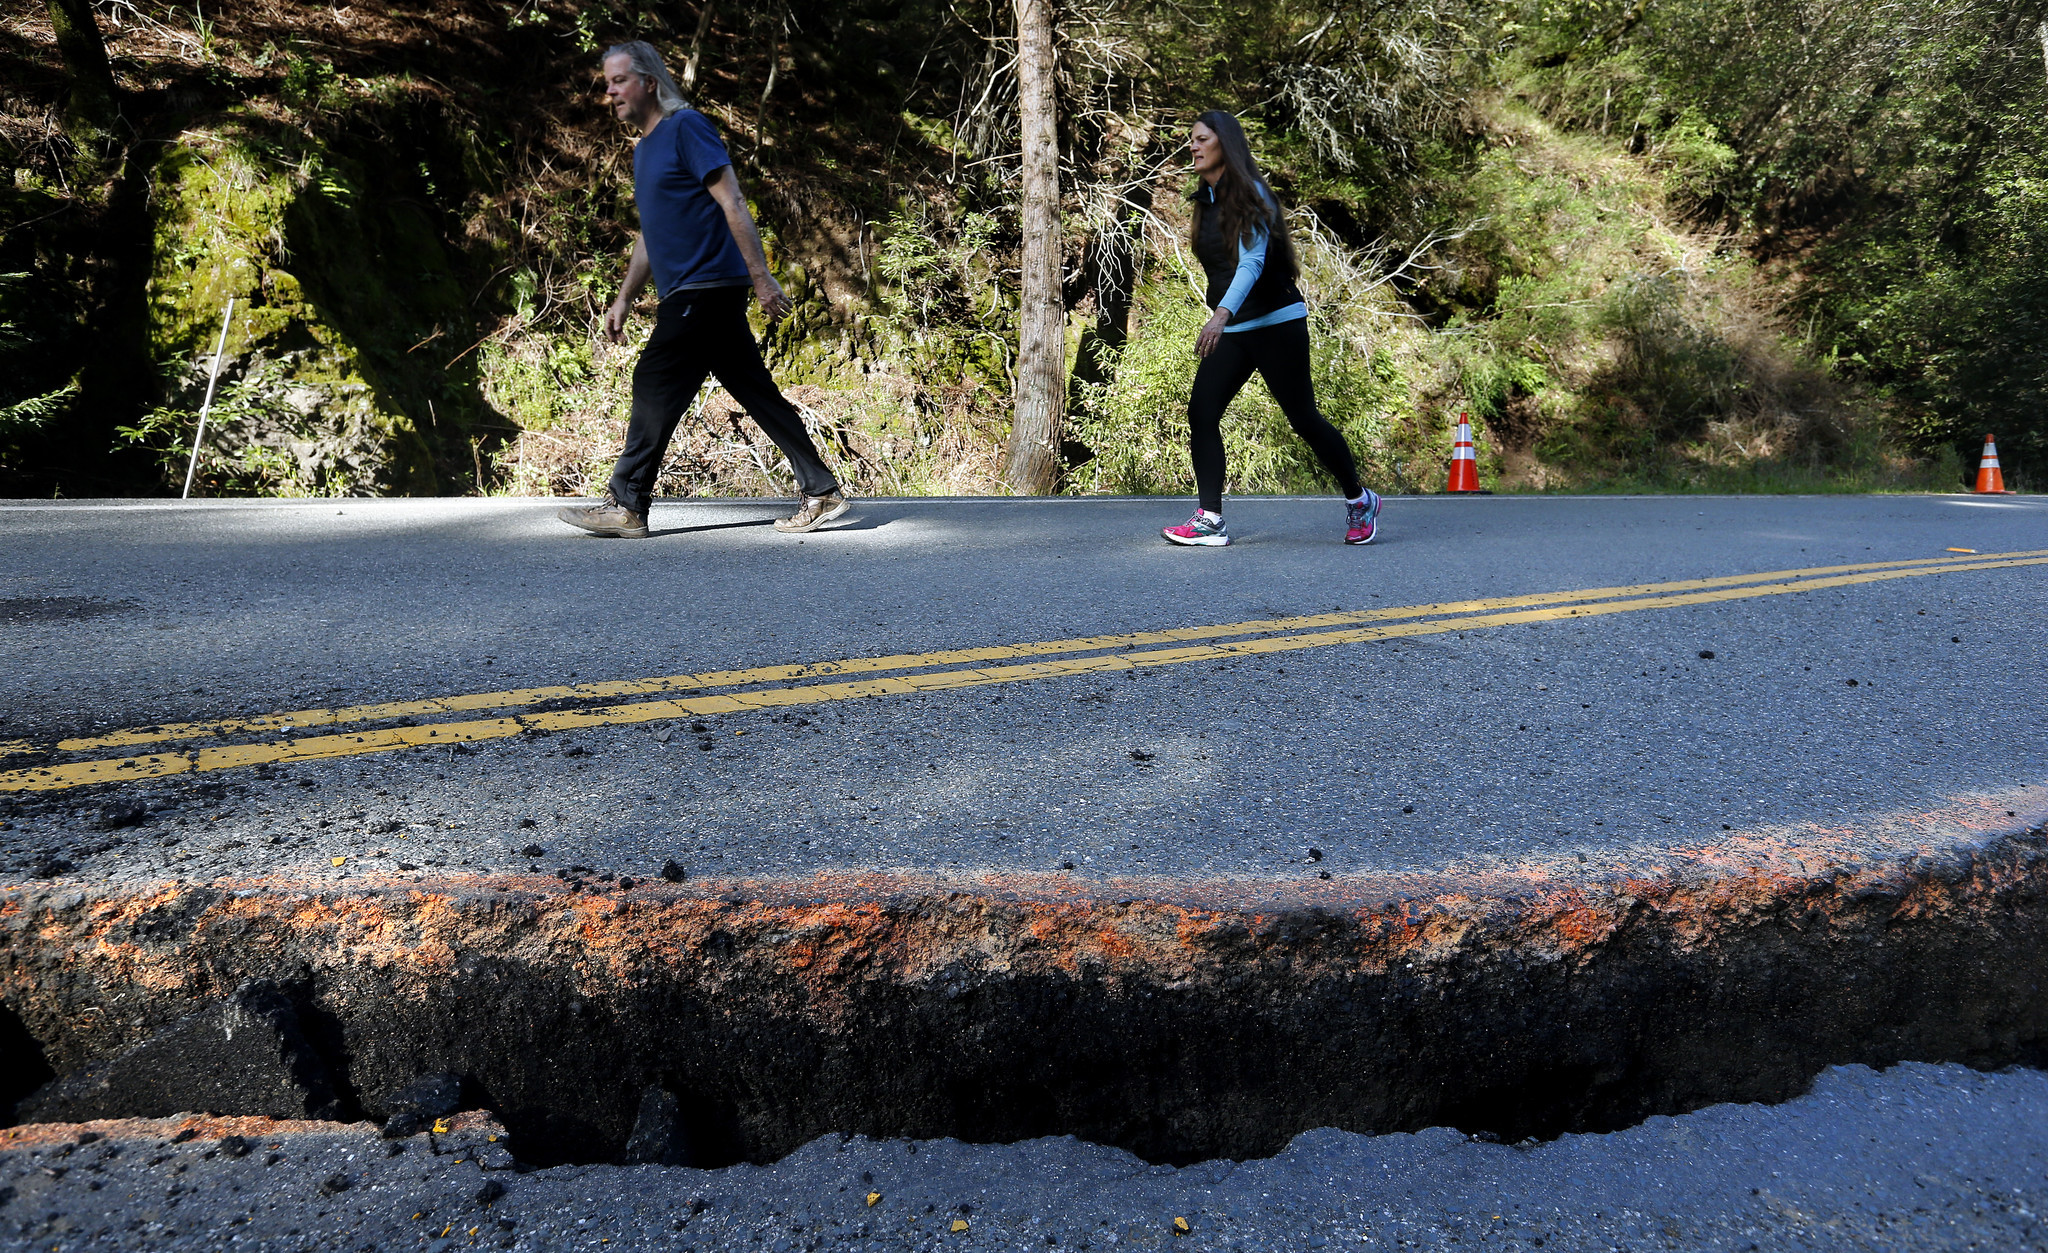 In addition to landslides, runoff from winter storms damaged Highway 1.